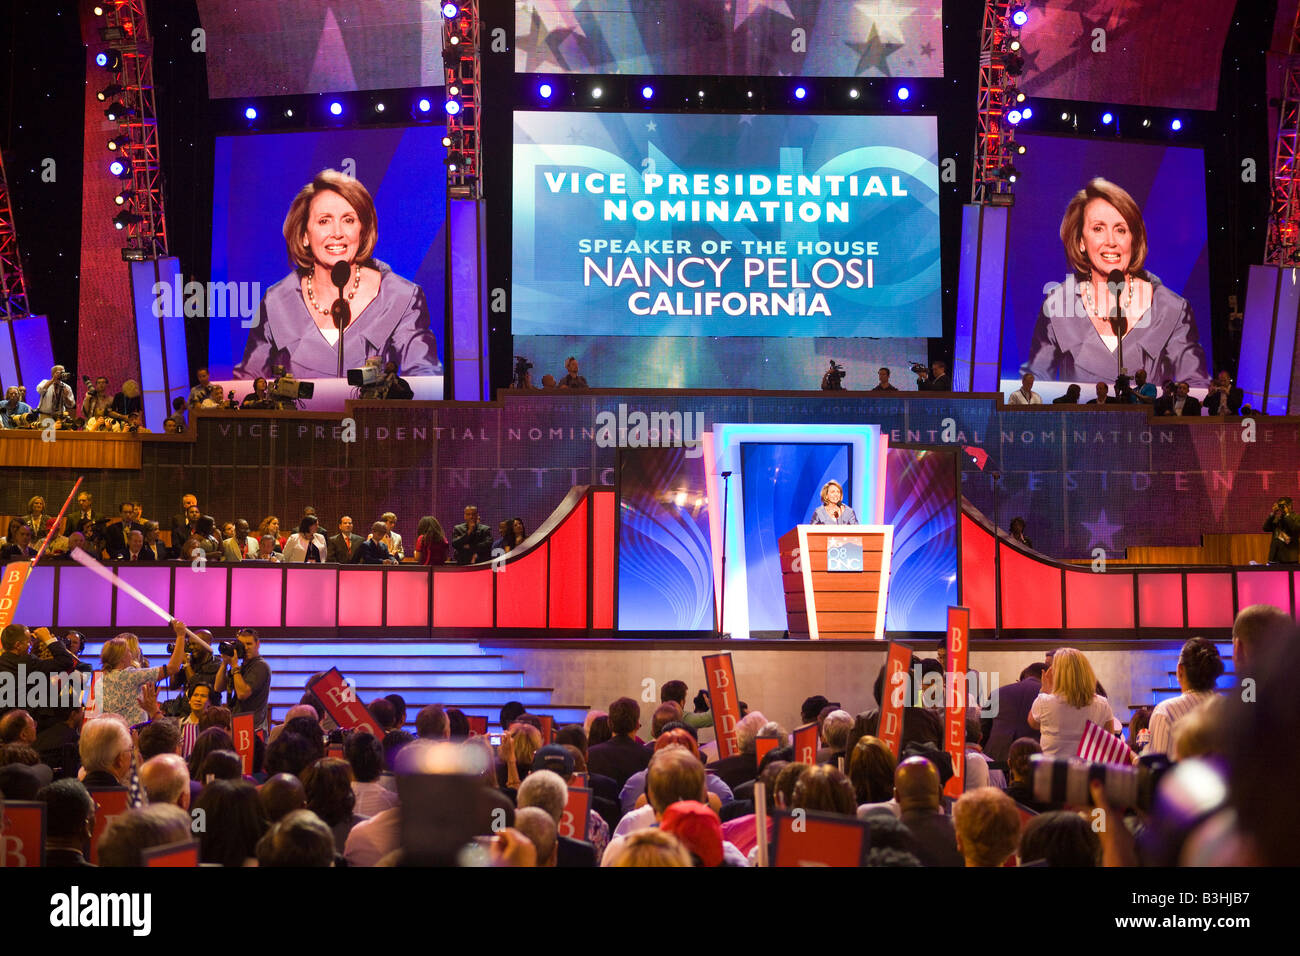 Speaker of the House Nancy Pelosi speaks about Joe Biden at the 2008 Democratic National Convention Stock Photo